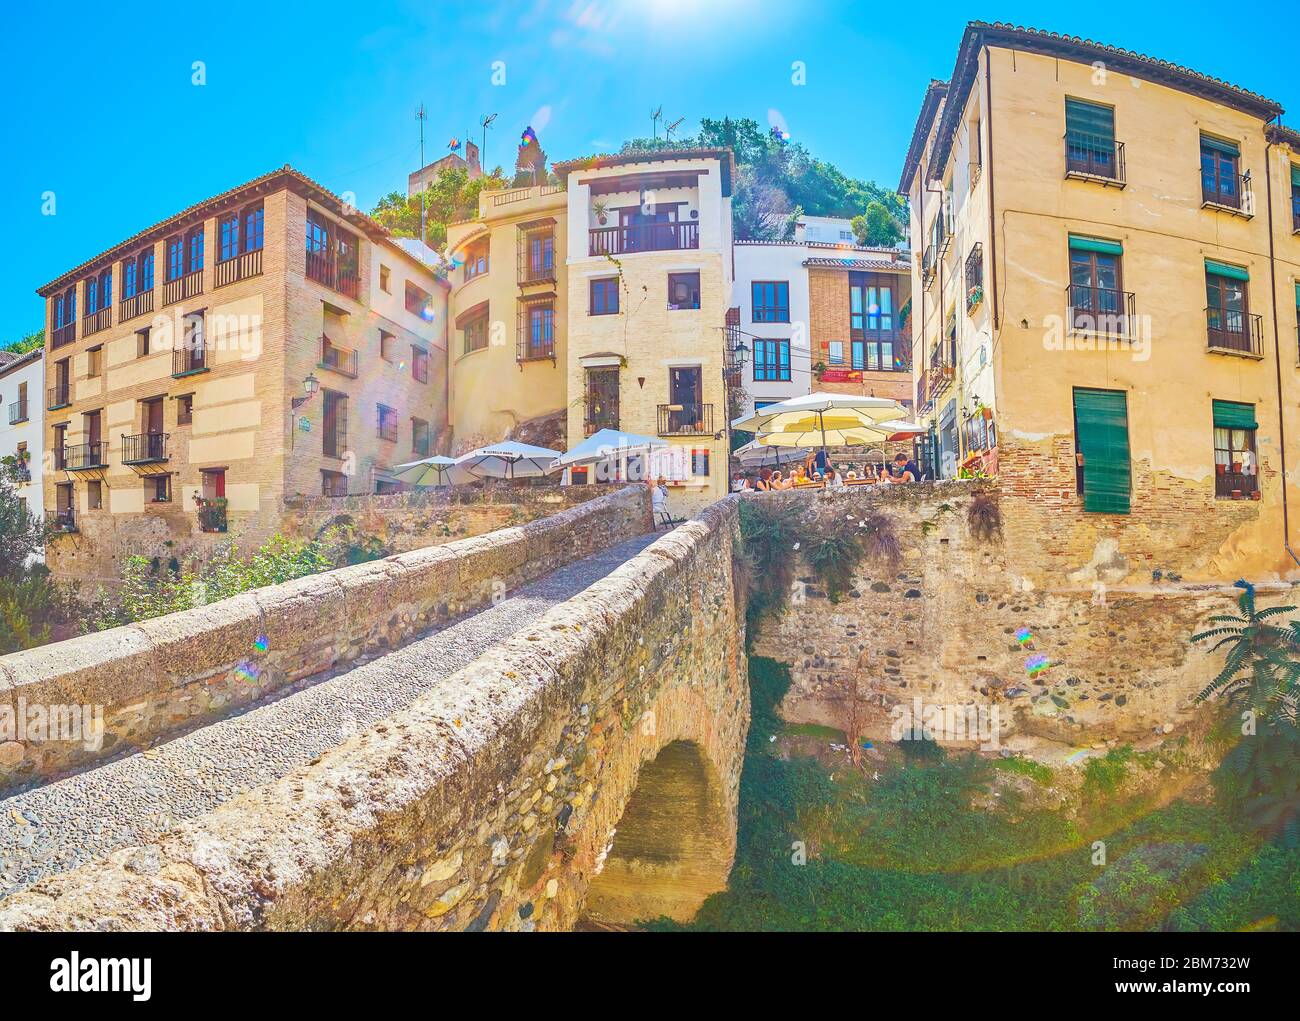 GRANADA, SPAIN - SEPTEMBER 25, 2019: Panorama of Cabrera bridge and foot of Sabika hill with old living buildings, cafes, bars, hotels and other touri Stock Photo